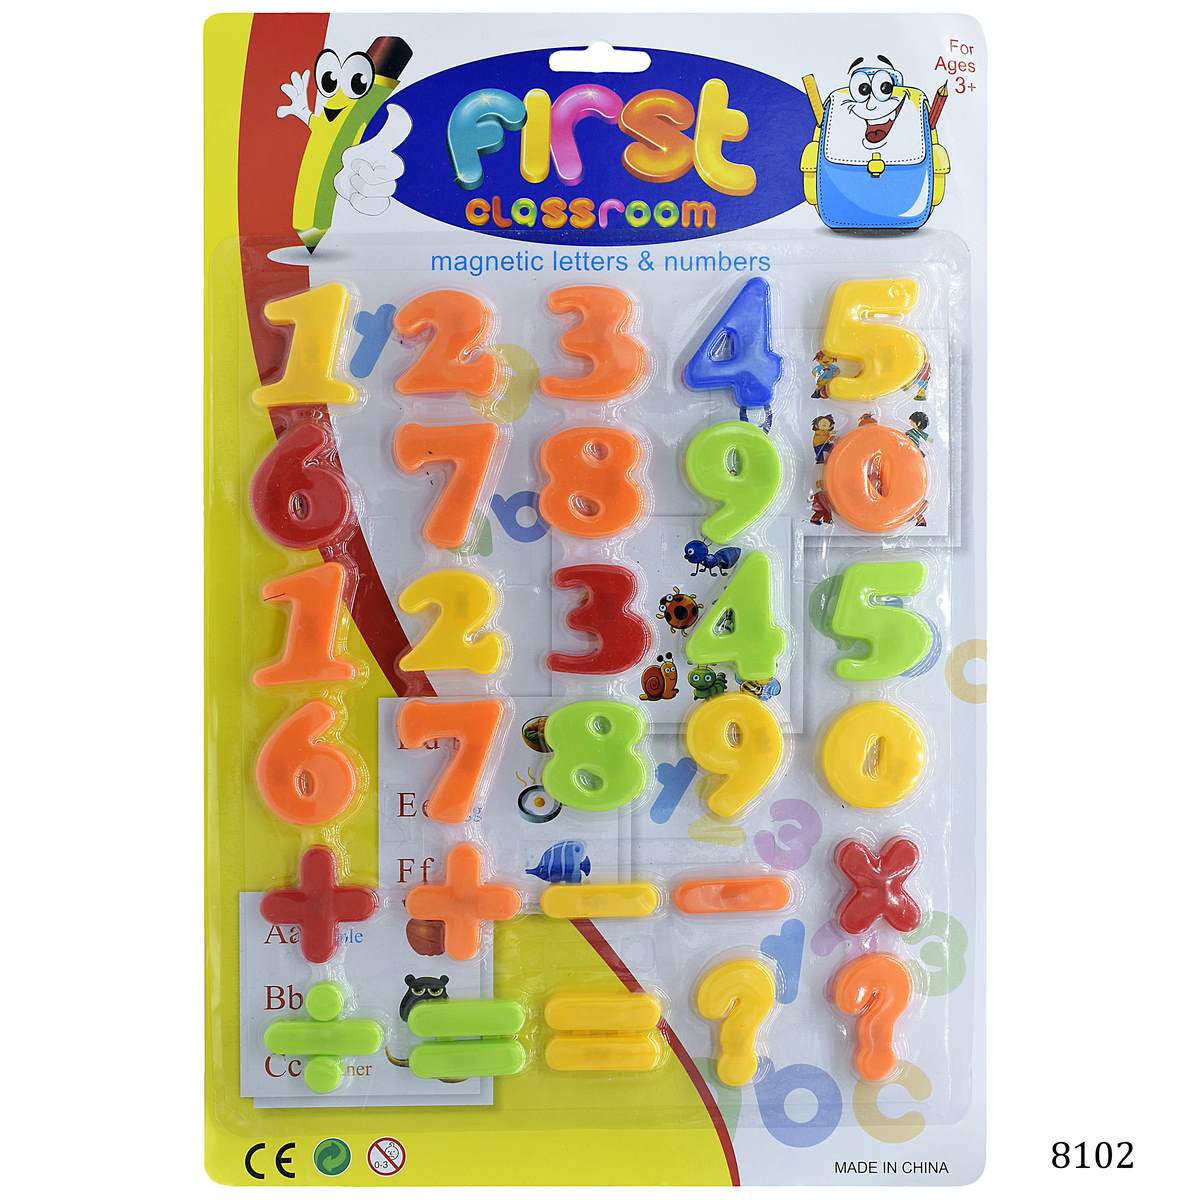 jags-mumbai Magnets Buttons & Coins Teaching Magnetic 30pcs Numbers & Symbols